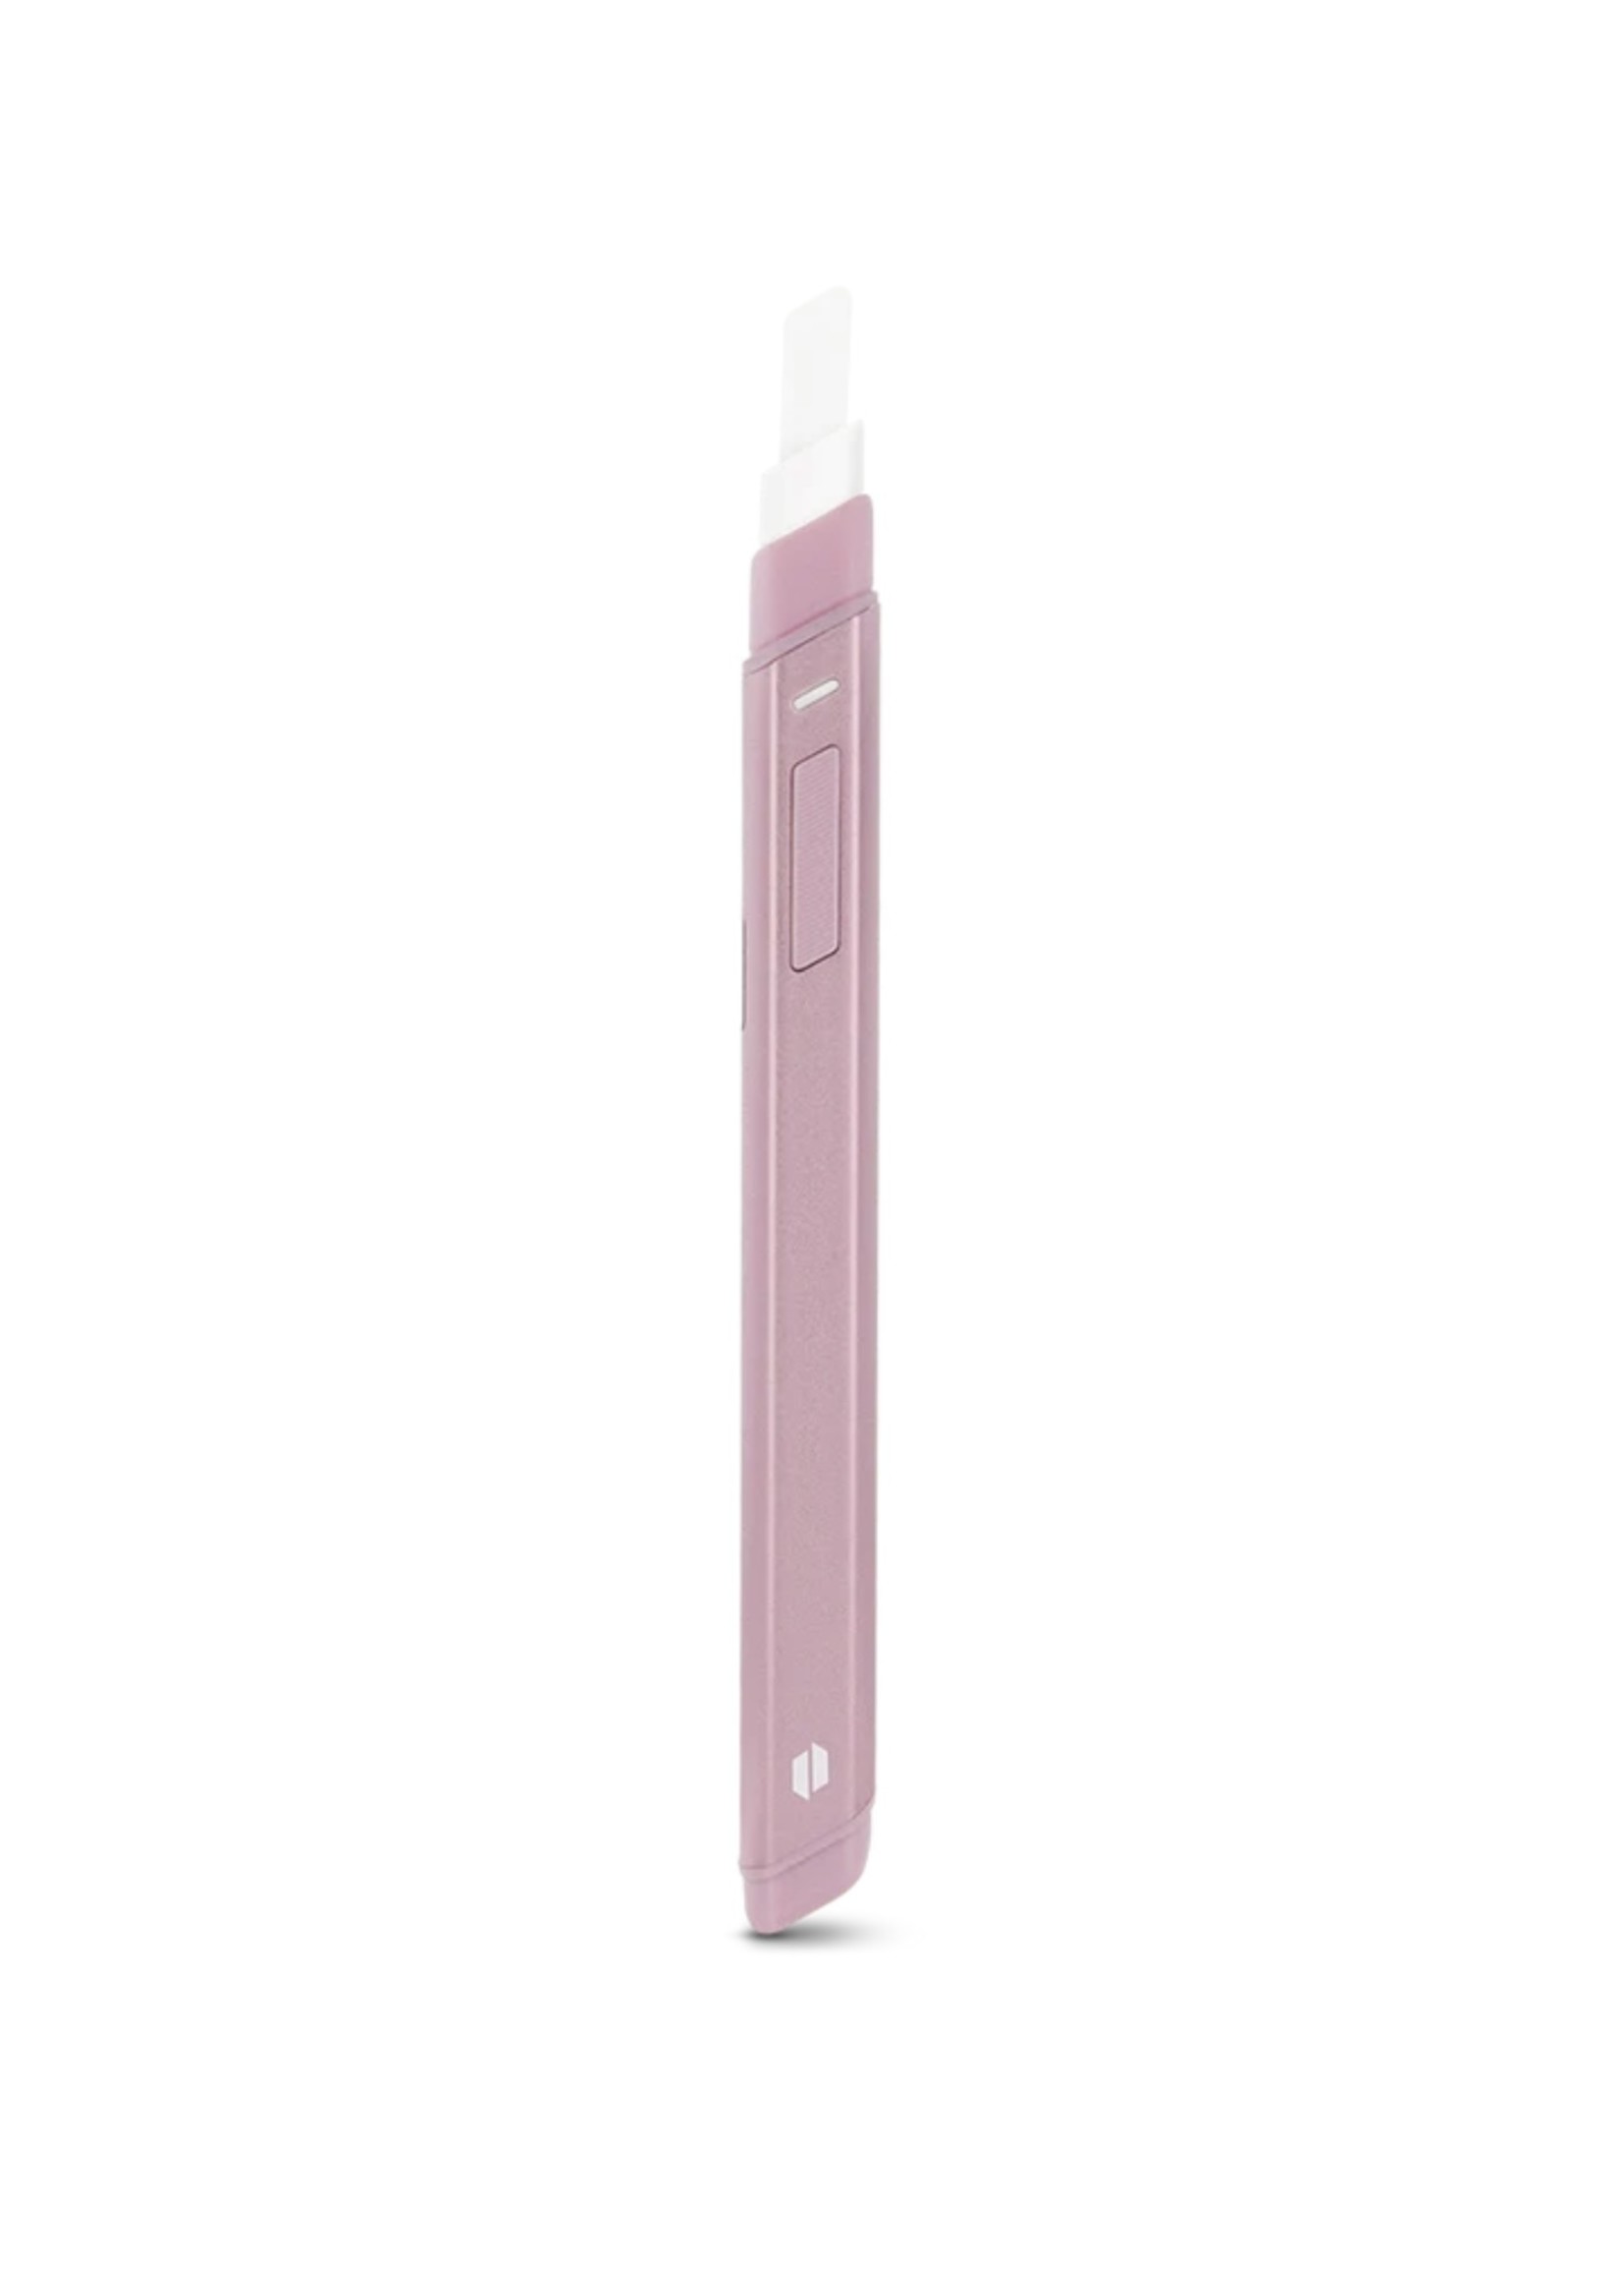 Puffco Puffco Hot Knife Pink Edition